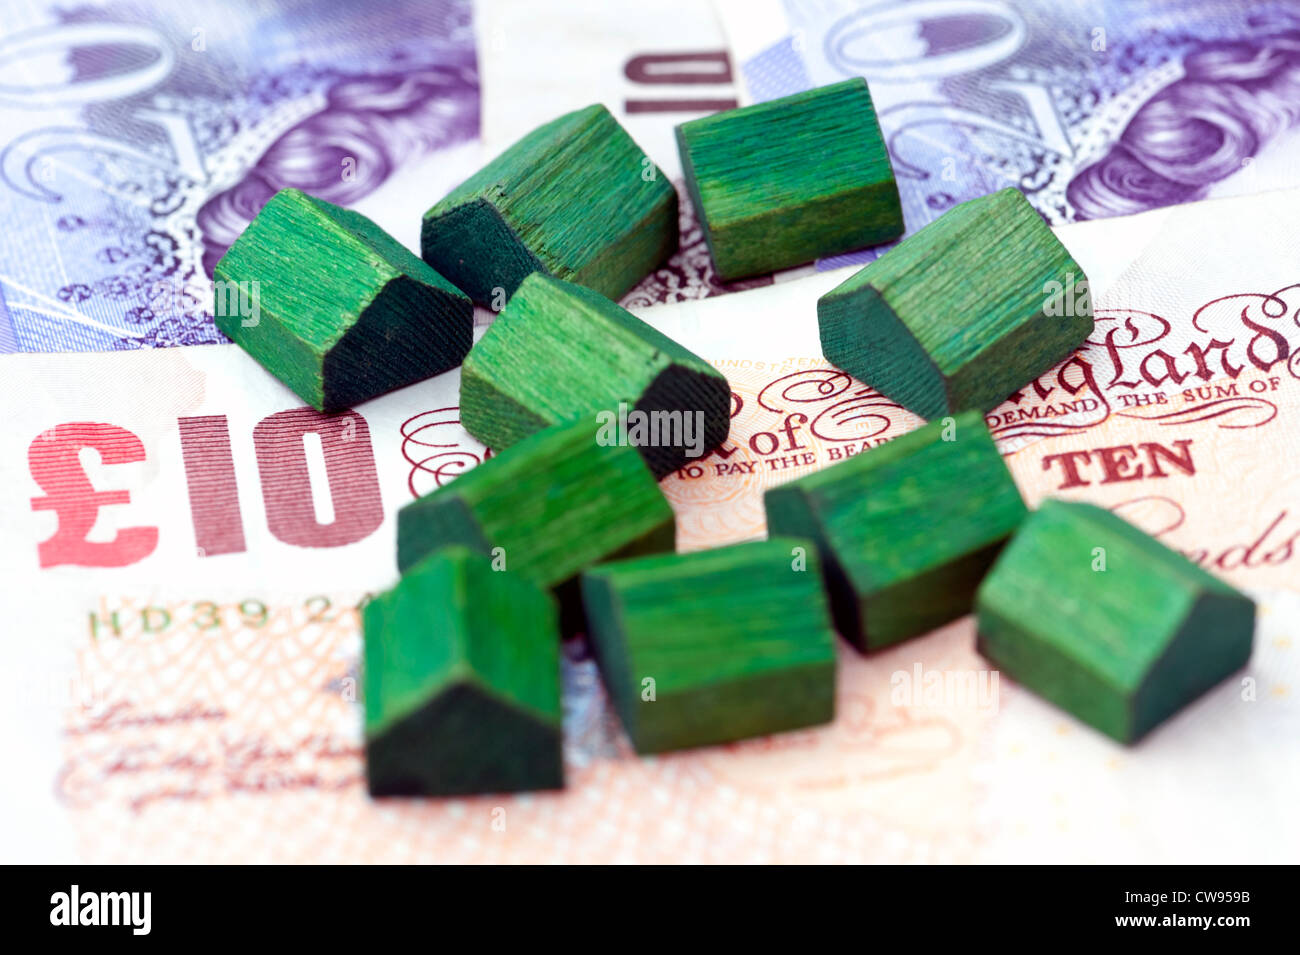 Toy houses sitting on pound notes representing house prices or financial services connected with the housing market. Stock Photo